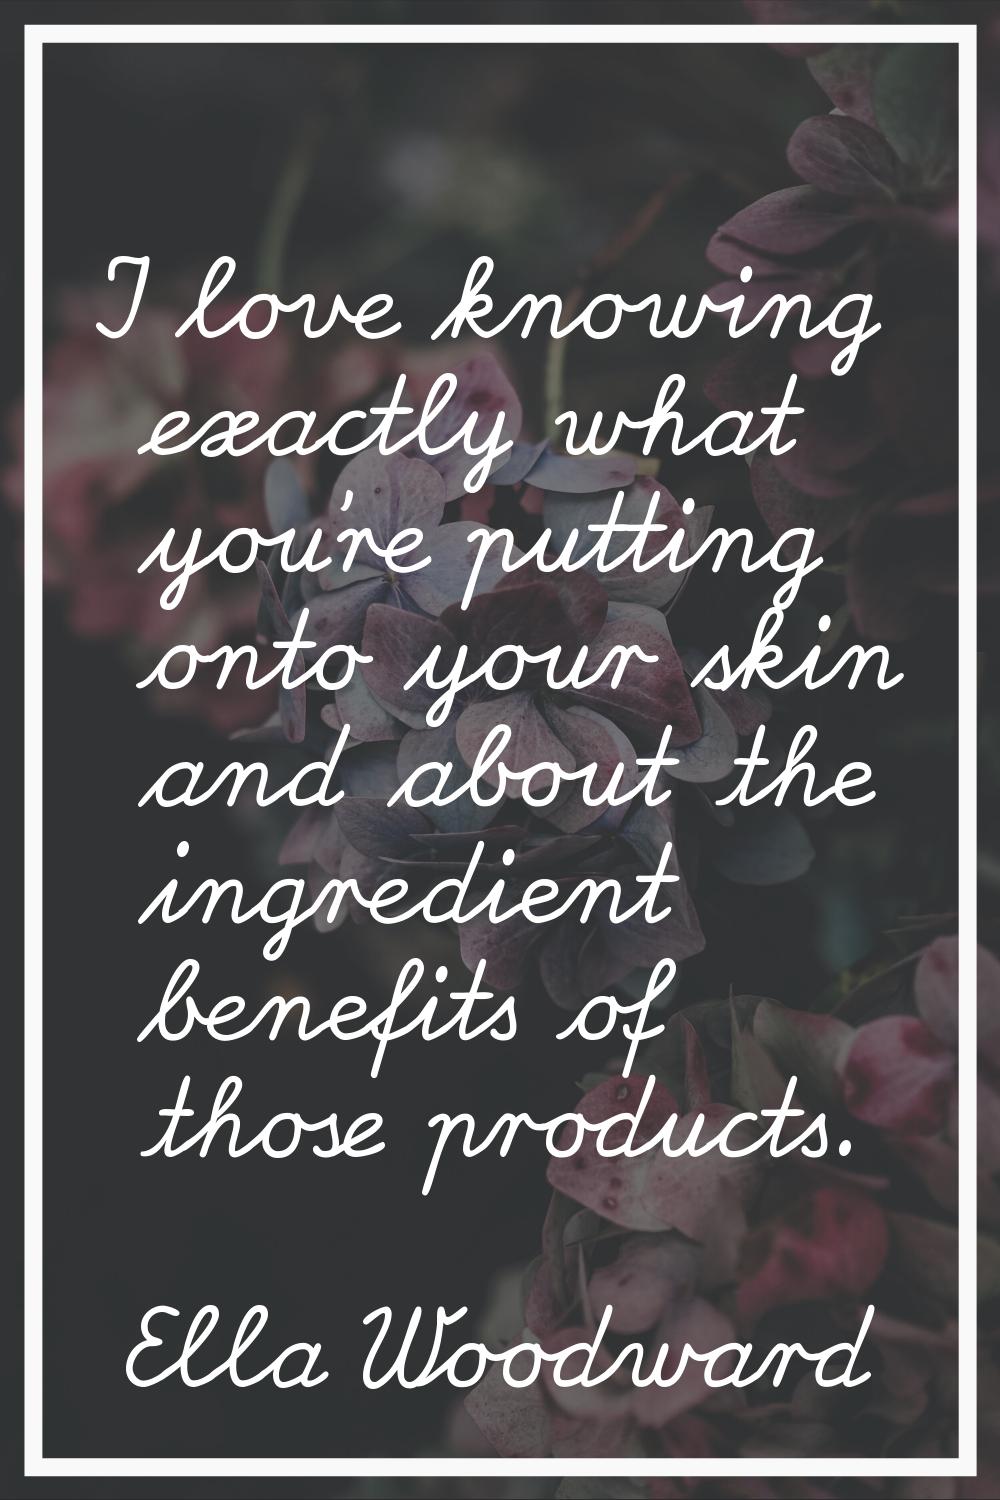 I love knowing exactly what you're putting onto your skin and about the ingredient benefits of thos